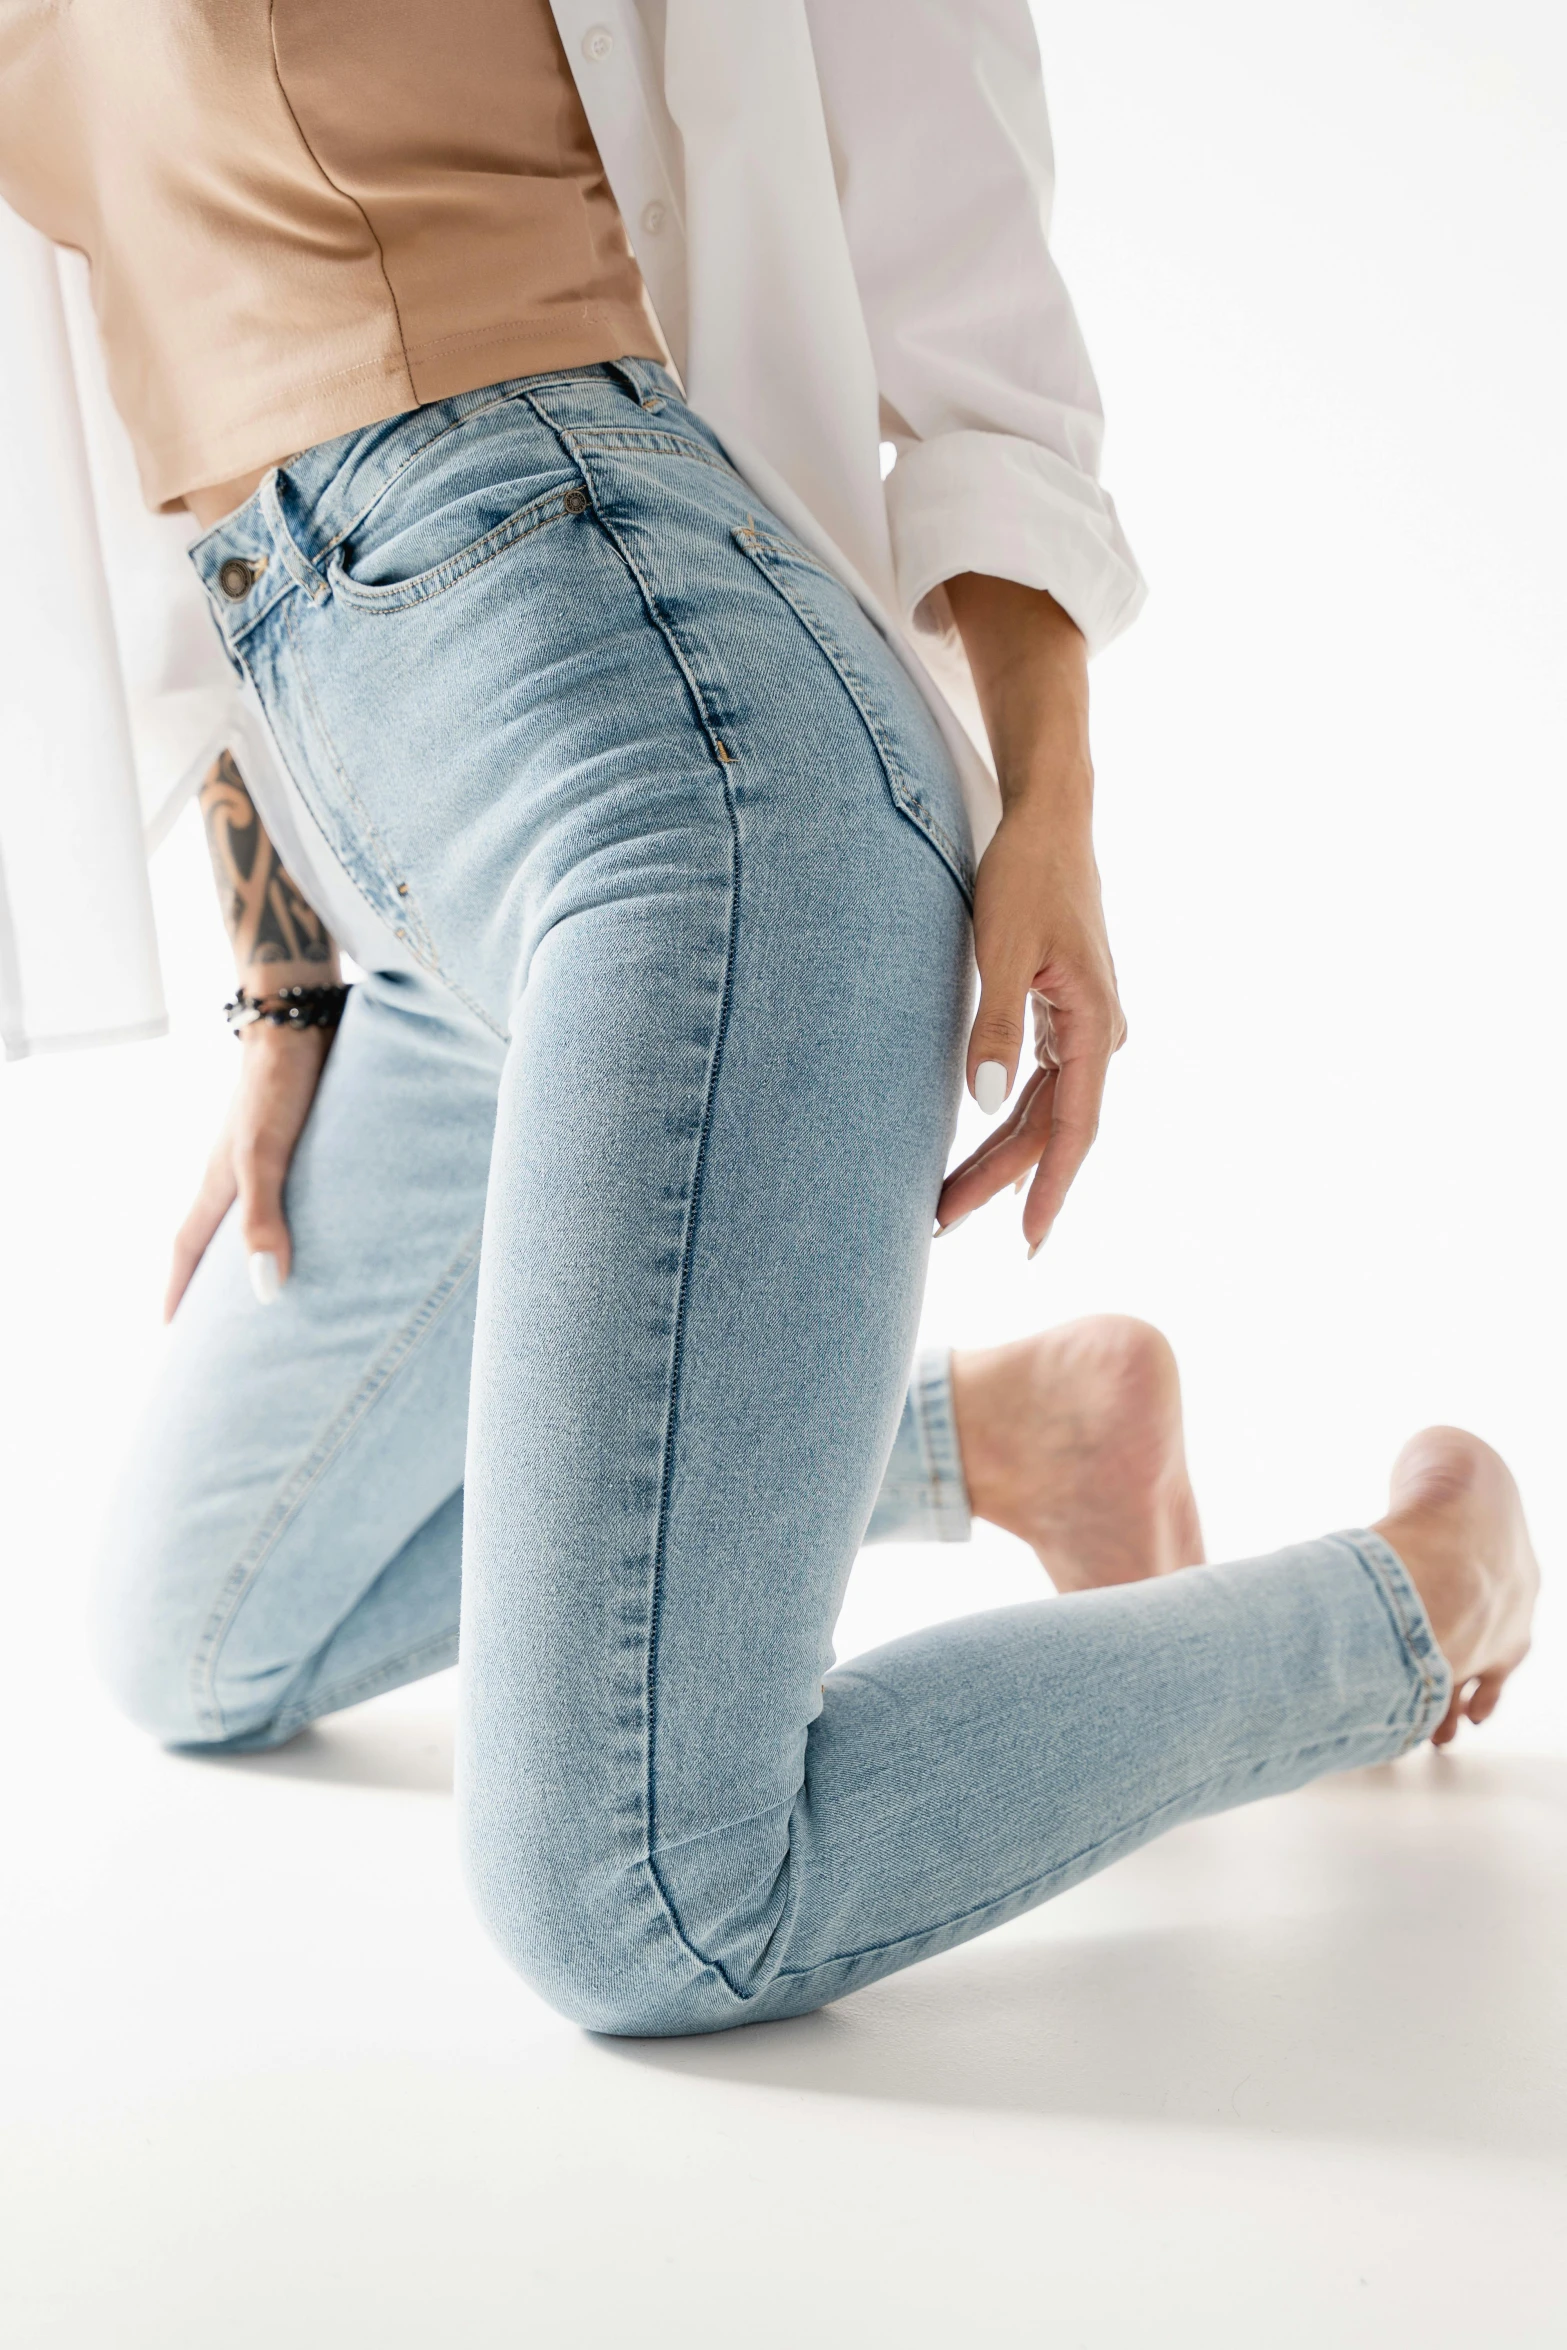 woman with tattoo on leg sitting on the ground in jeans